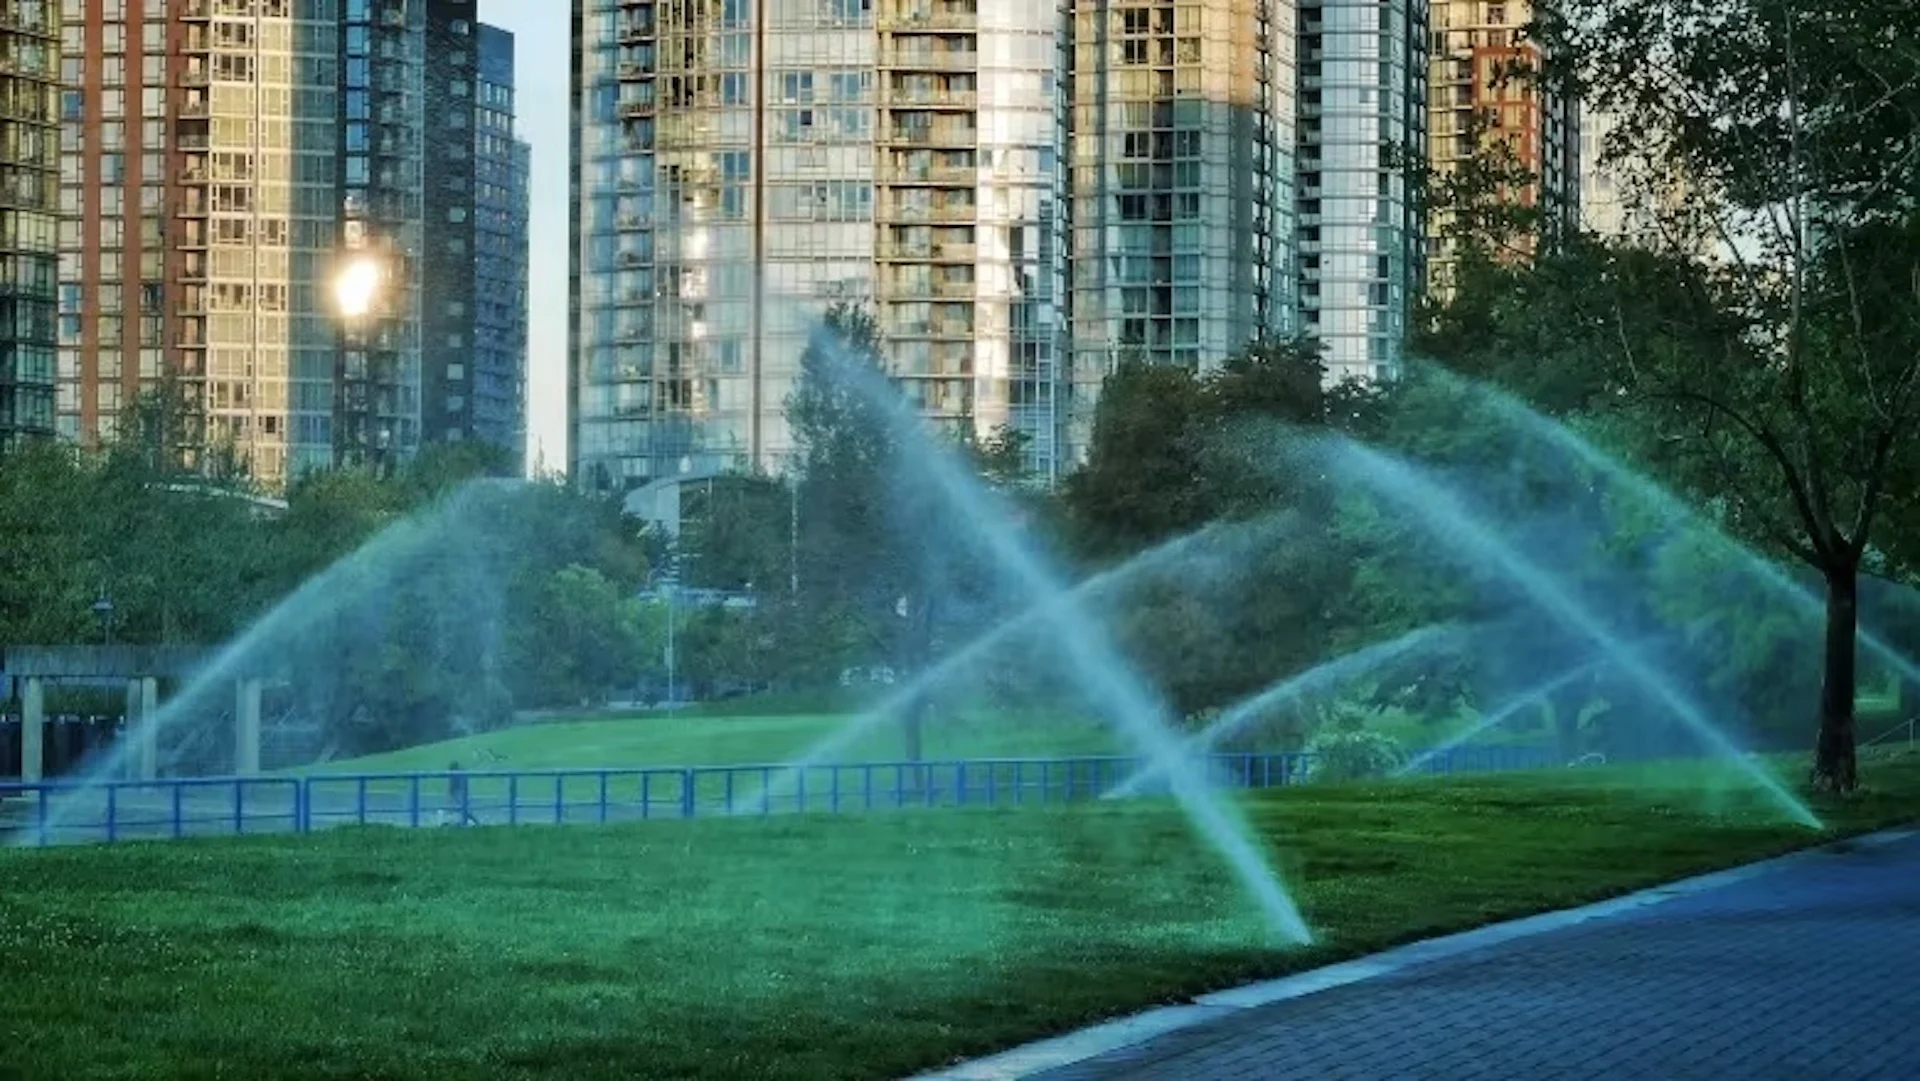 Lawn-watering ban starts Friday in Metro Vancouver amid continuing drought